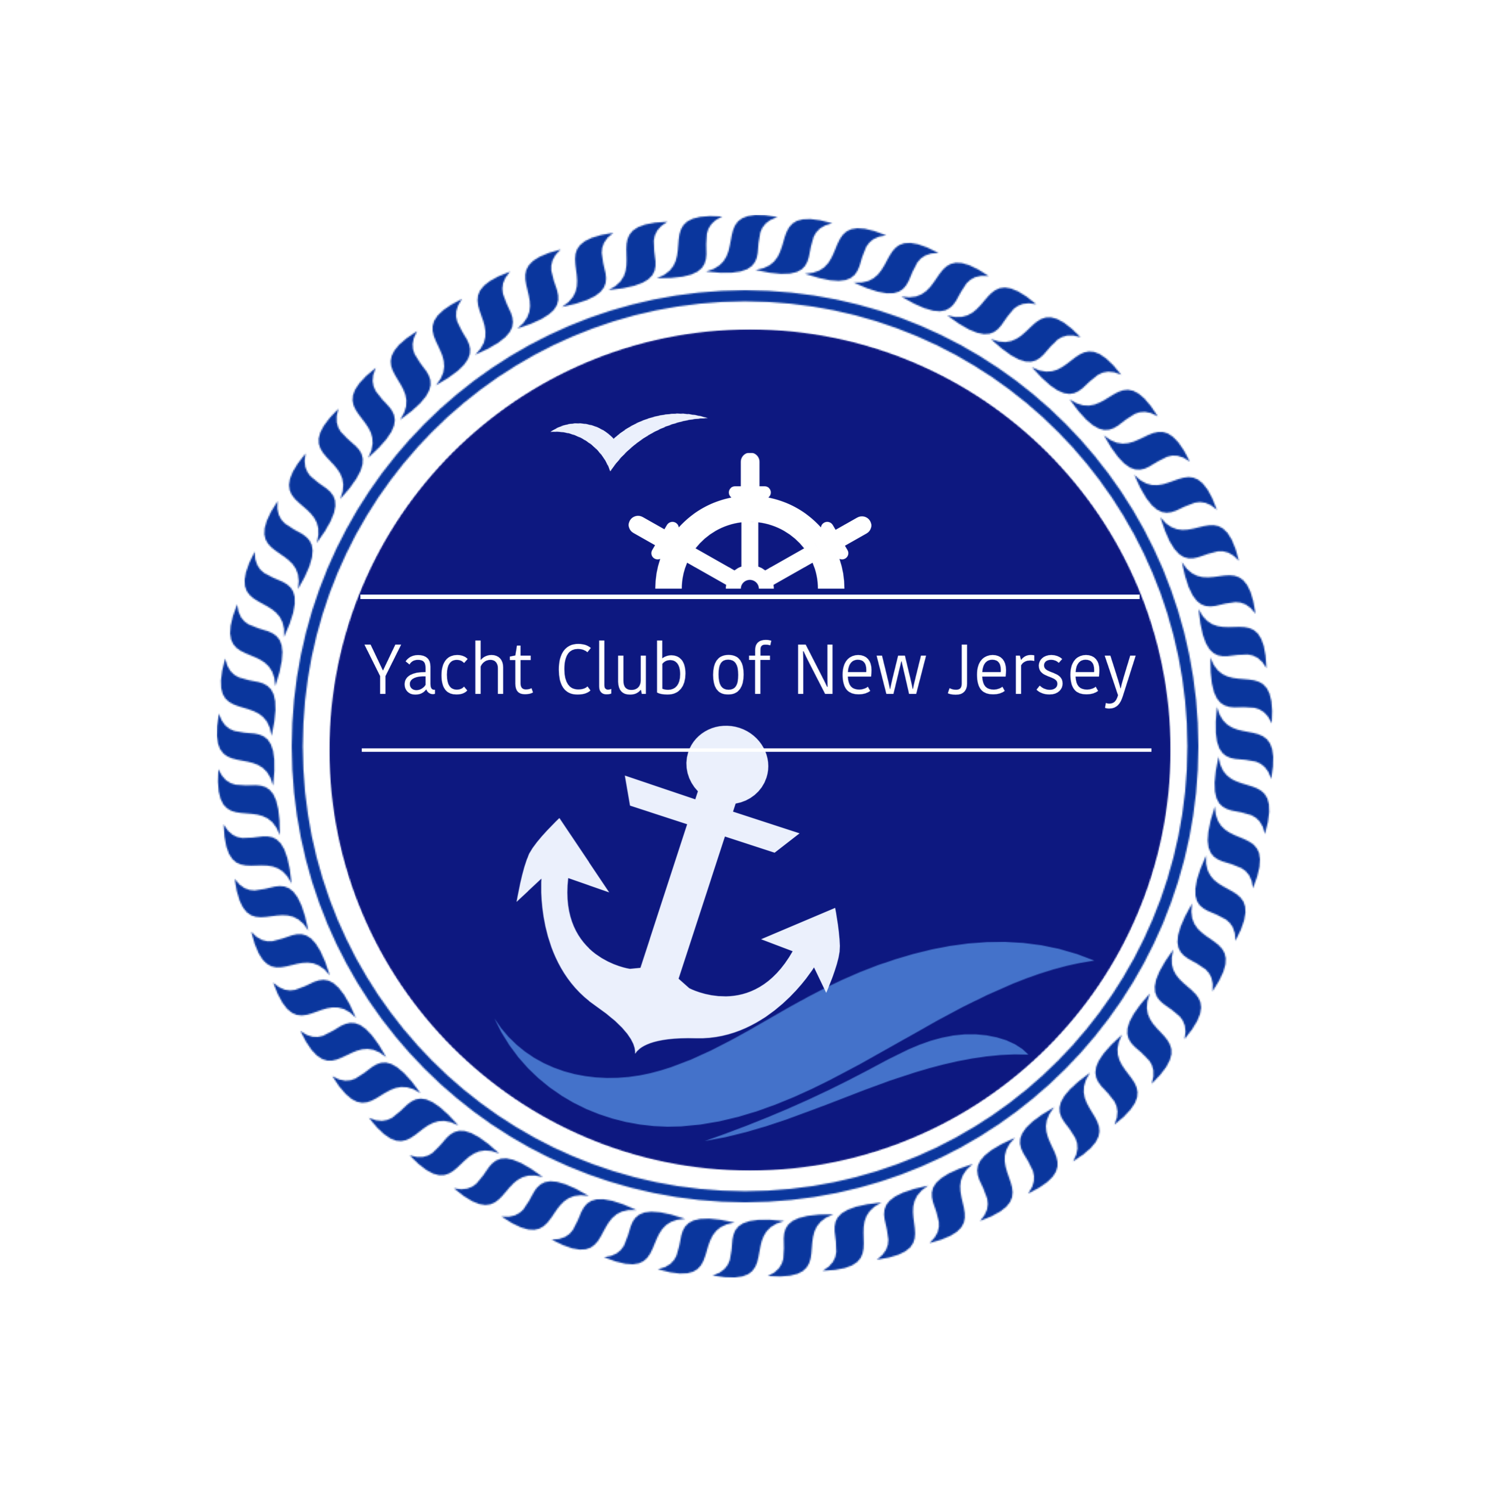 YACHT CLUB OF NEW JERSEY